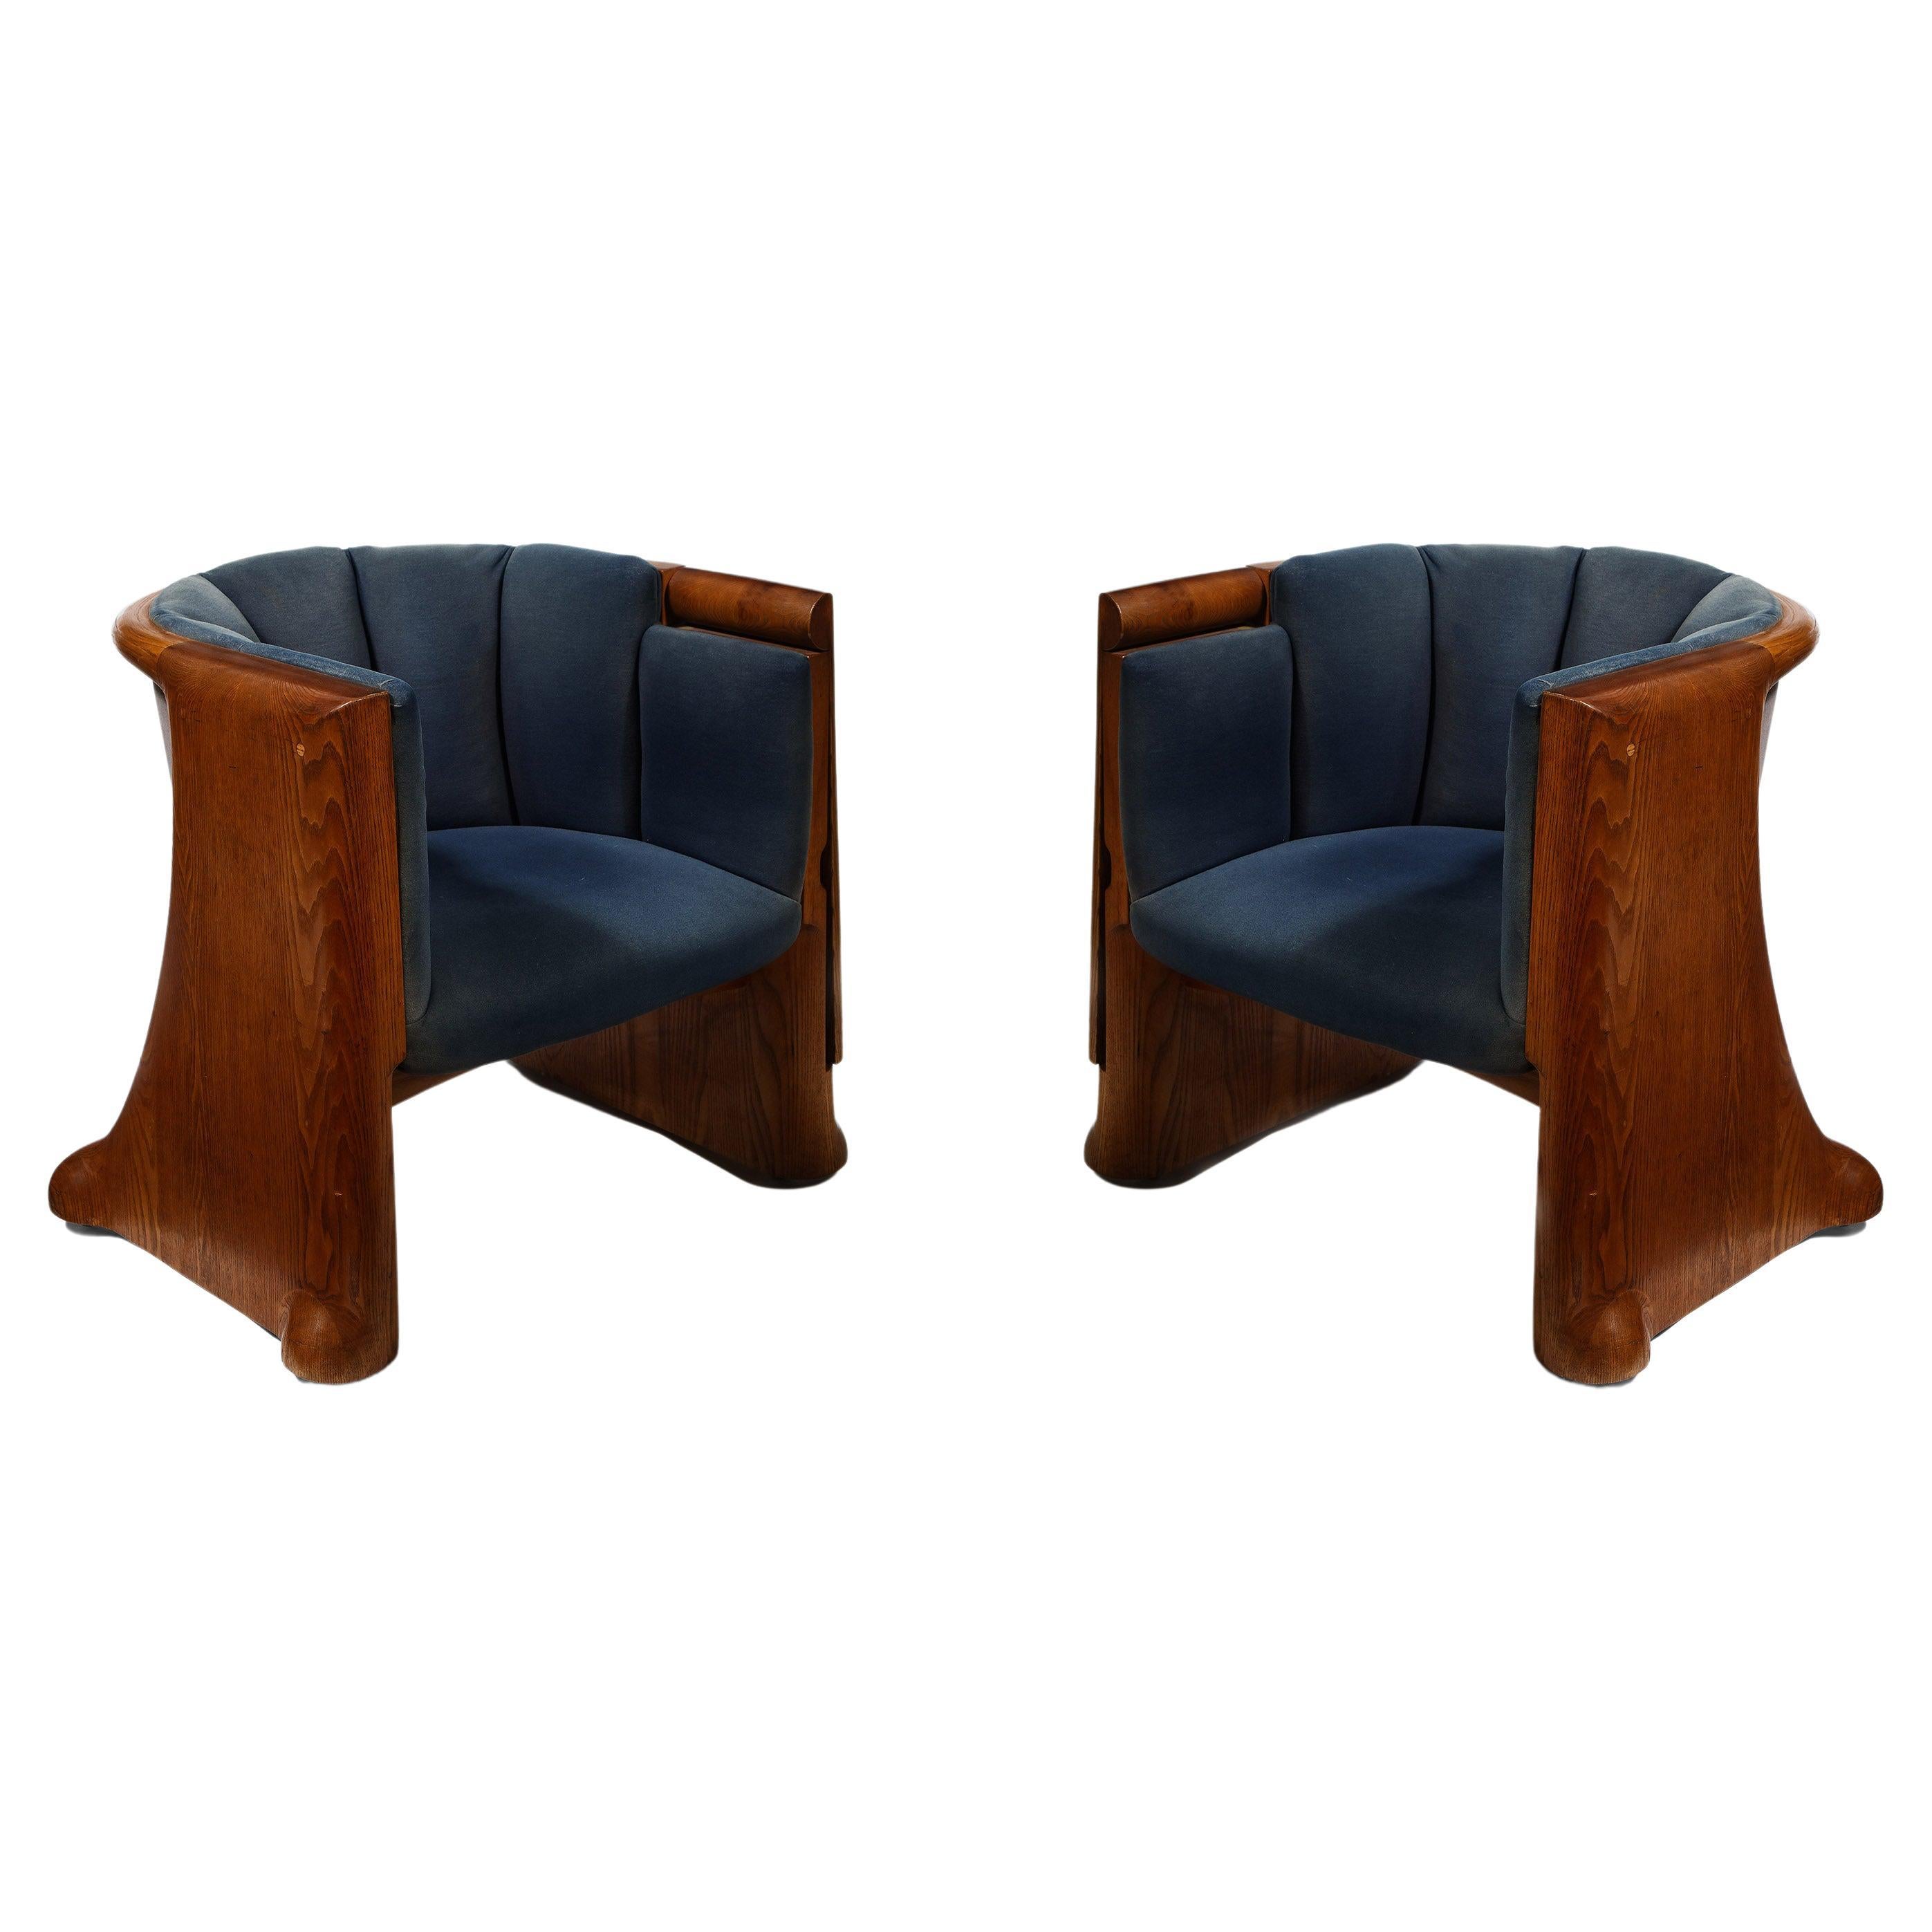 Wendell Castle Pair of Arm Chairs